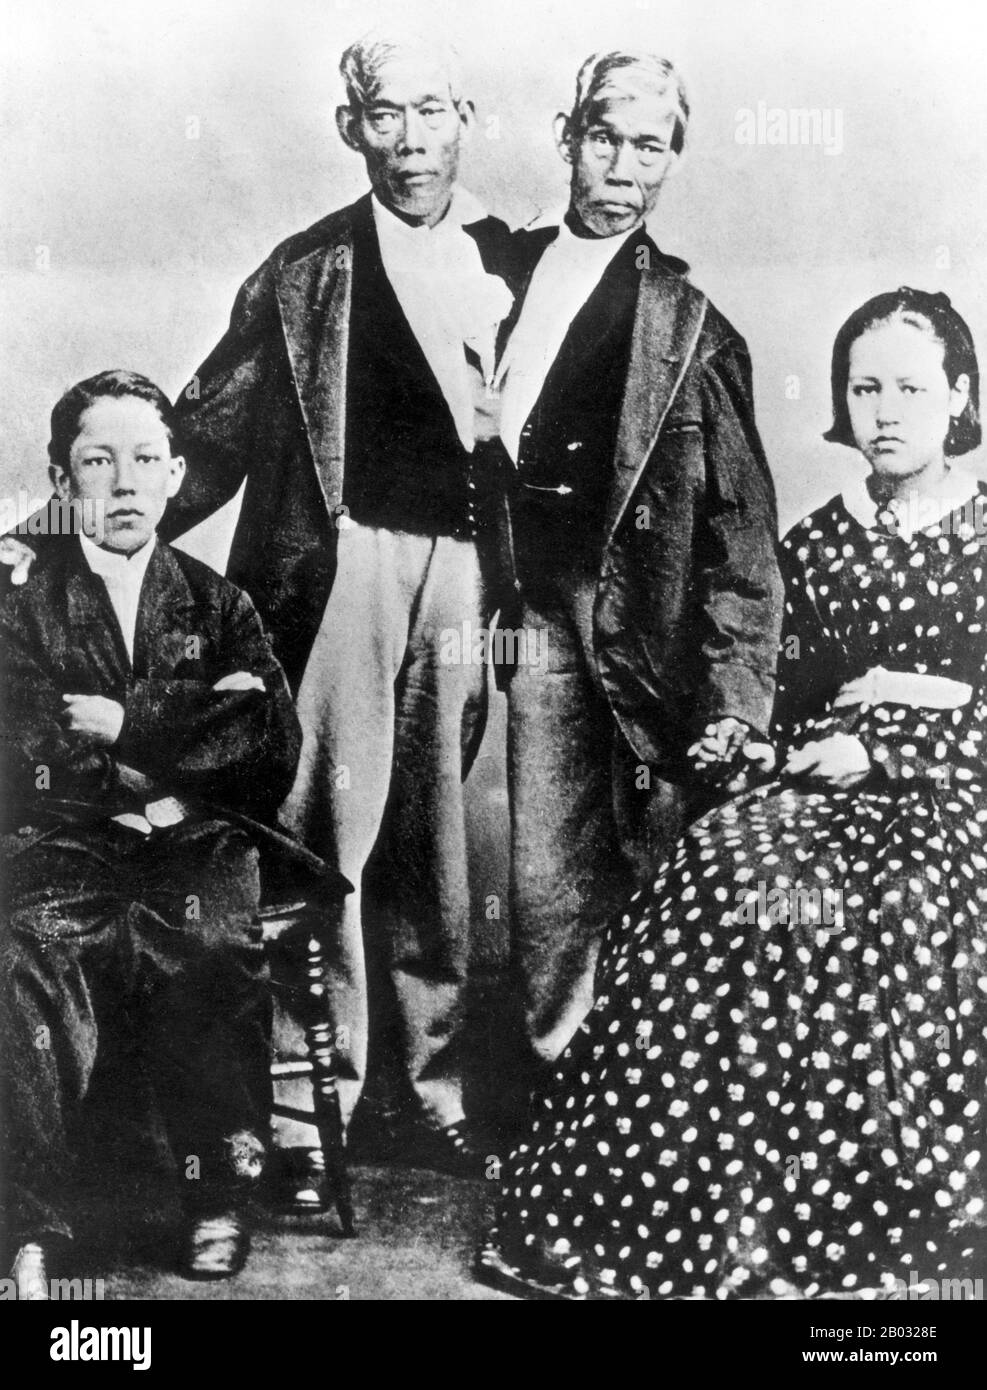 Chang and Eng Bunker (May 11, 1811 – January 17, 1874) were Thai-American conjoined twin brothers whose condition and birthplace became the basis for the term 'Siamese twins'.  The Bunker brothers were born on May 11, 1811, in the province of Samutsongkram, near Bangkok, in the Kingdom of Siam (today's Thailand). Their fisherman father was a Chinese Thai, while their mother was a Chinese Malaysian. Because of their Chinese heritage, they were known locally as the 'Chinese Twins'. The brothers were joined at the sternum by a small piece of cartilage, and though their livers were fused, they wer Stock Photo